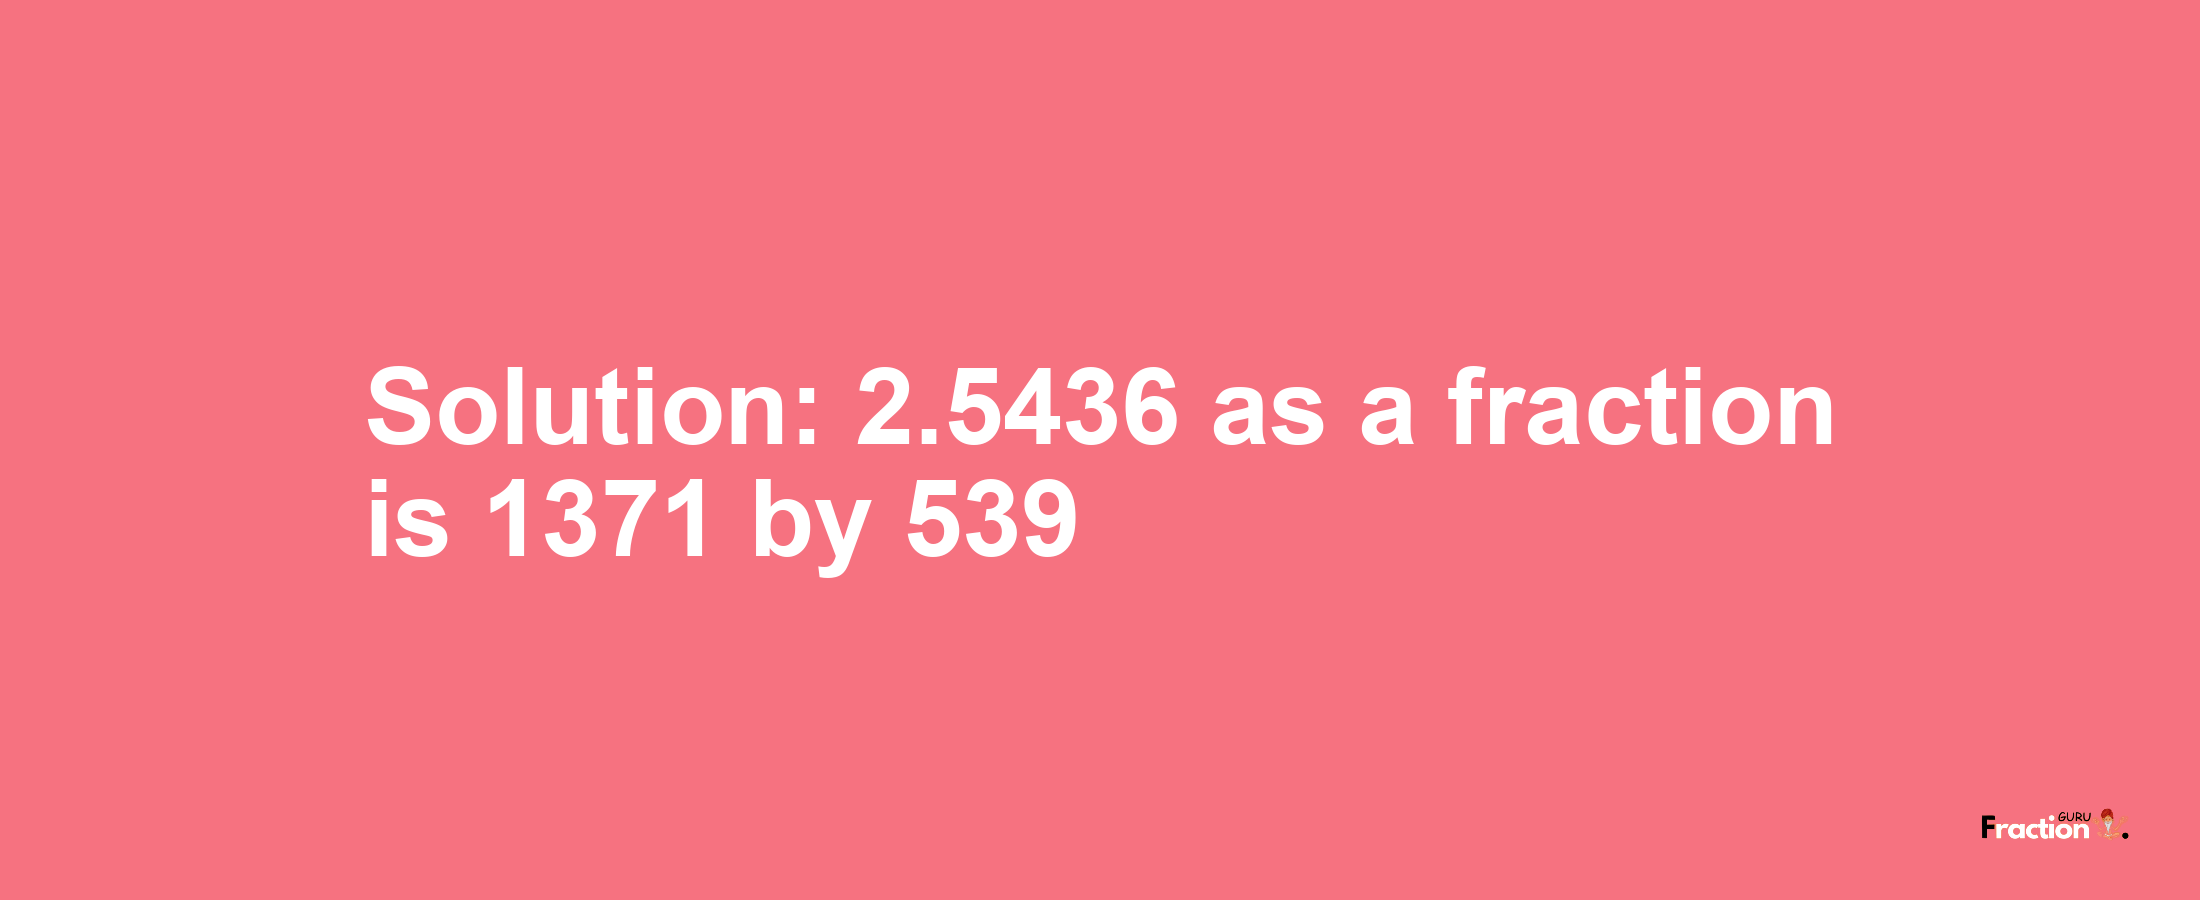 Solution:2.5436 as a fraction is 1371/539